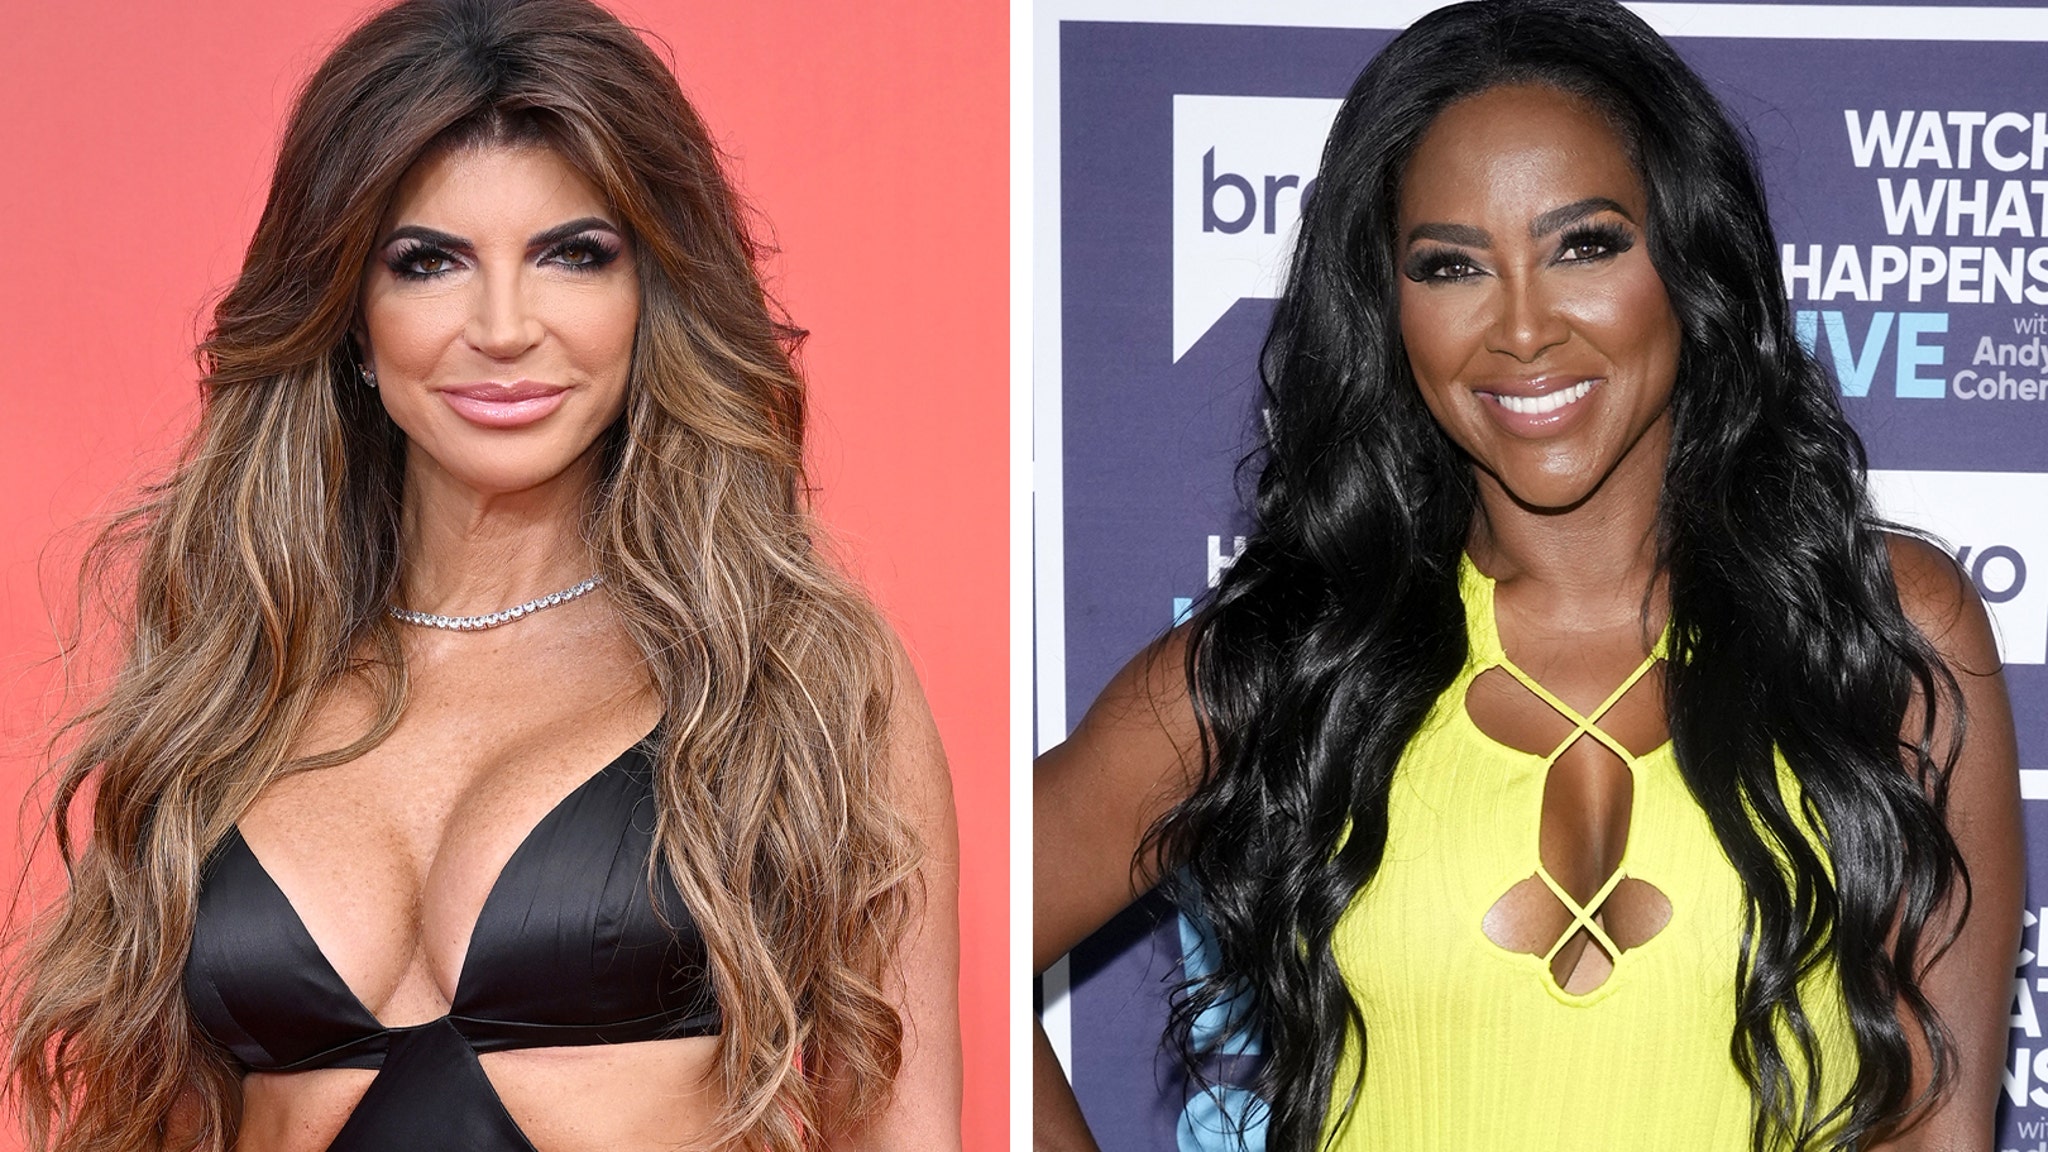 Teresa Giudice Says Kenya Moore Encouraged Her to Join Dancing with the Stars